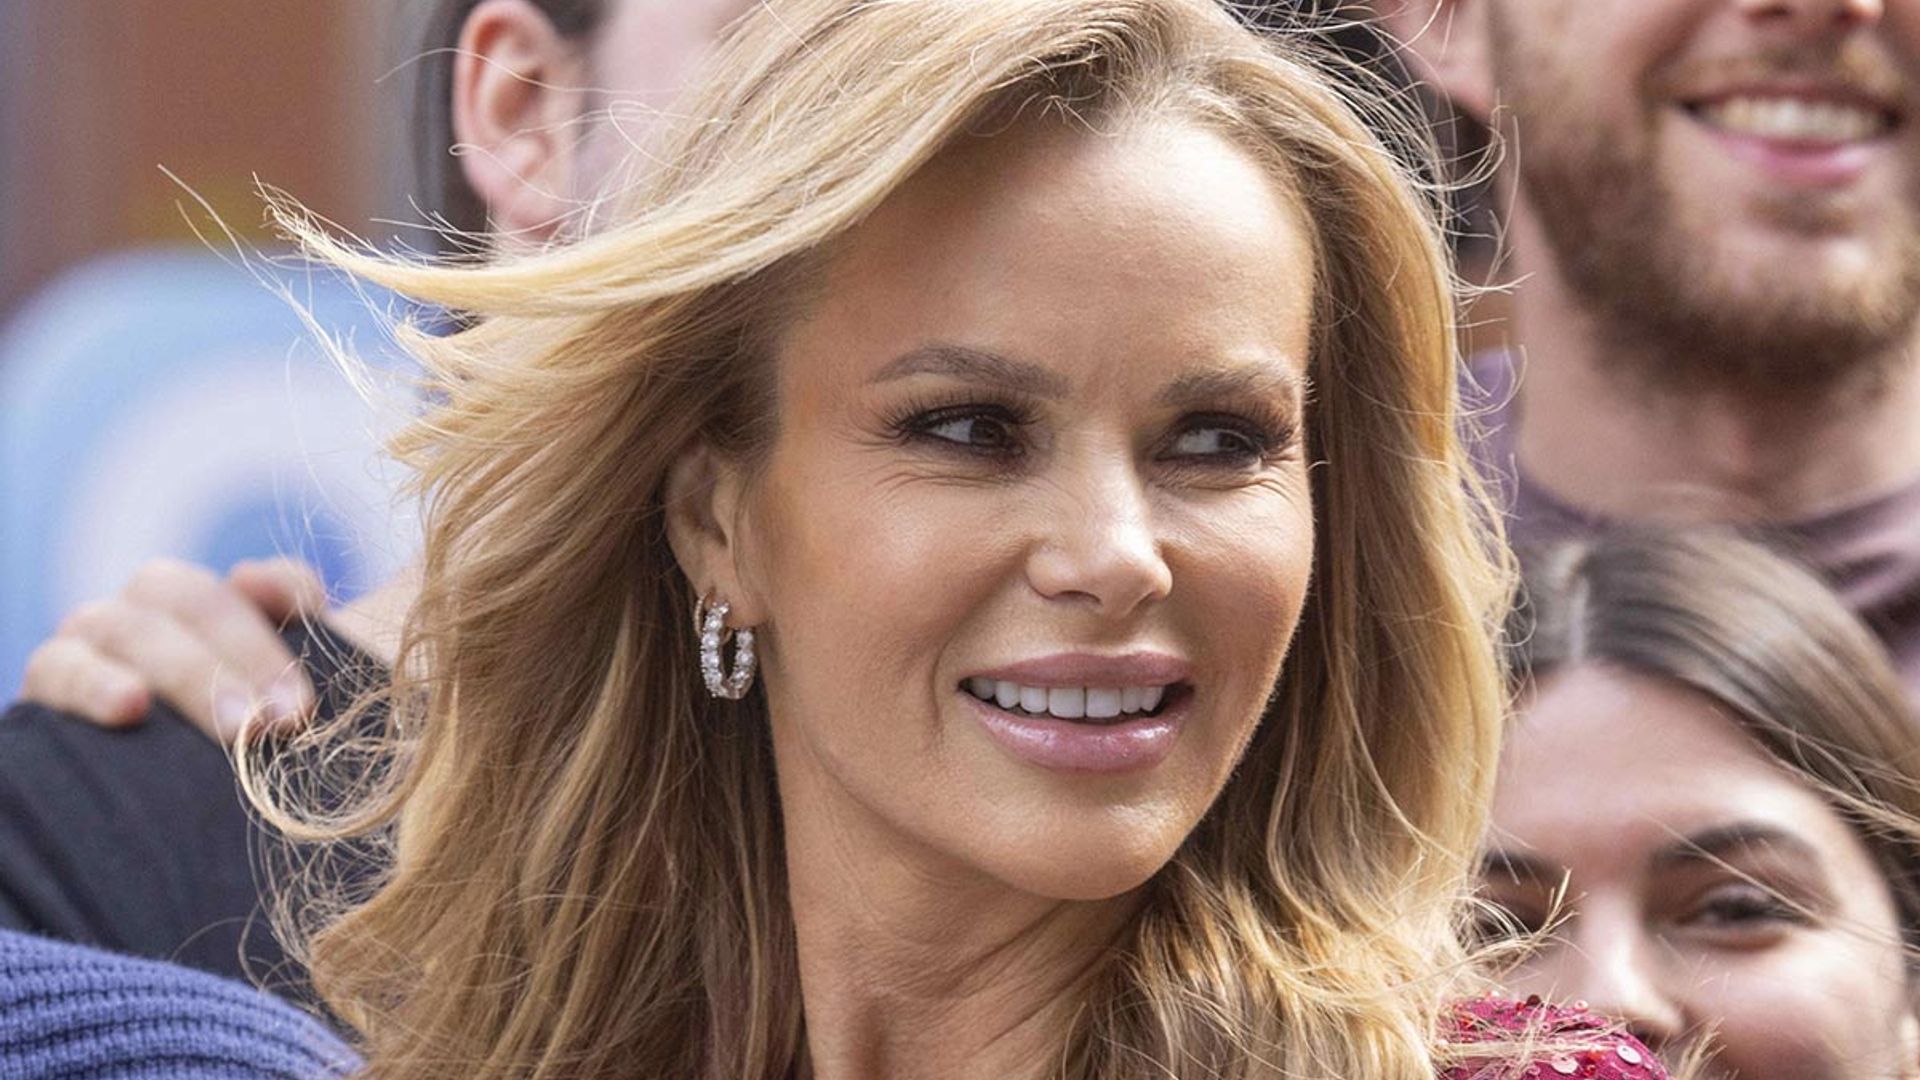 Amanda Holden struts in the most glamorous jumpsuit we've seen